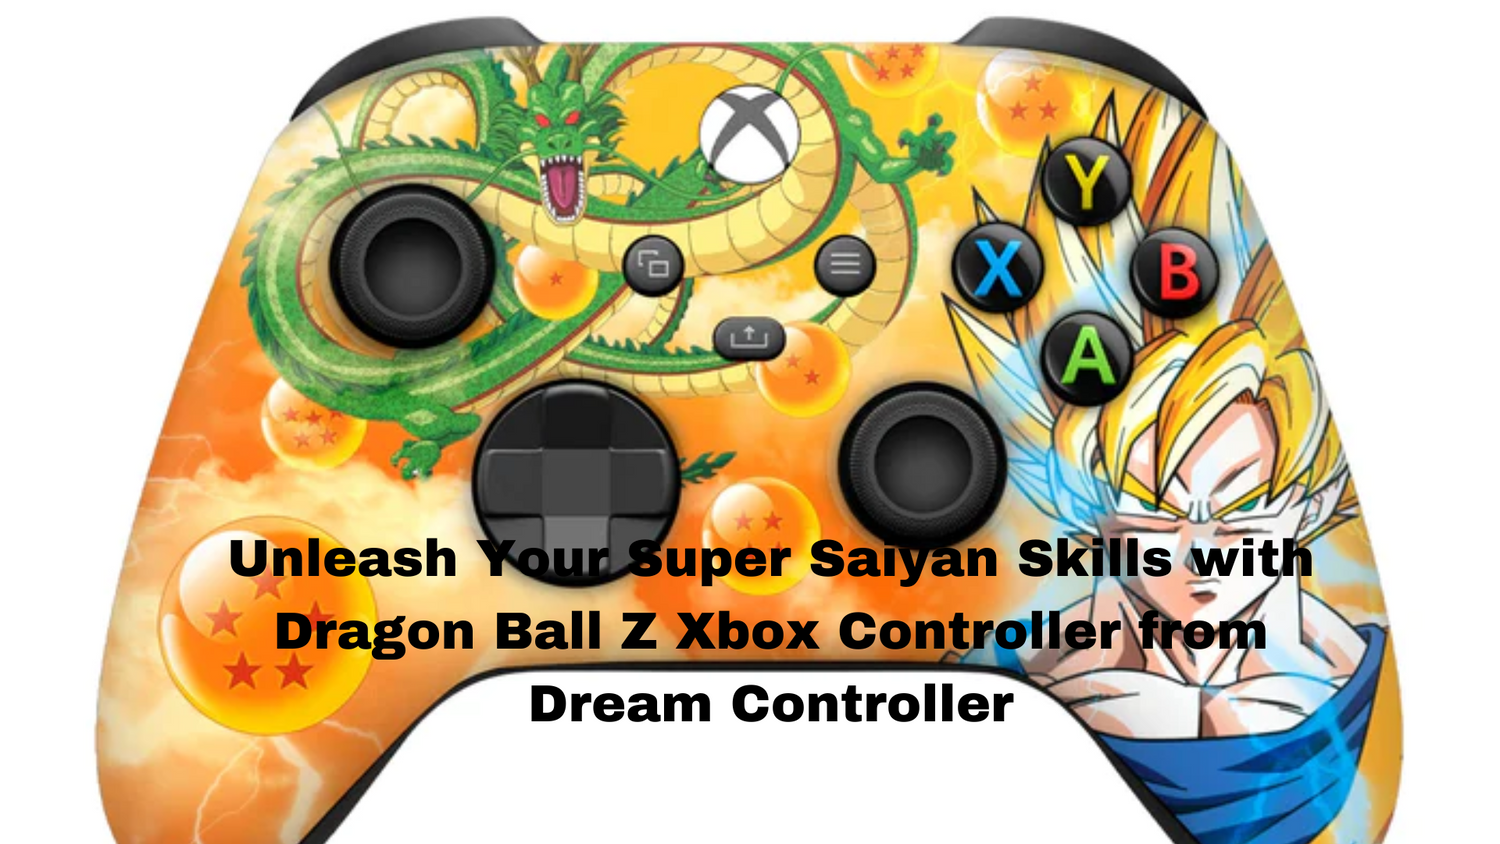 Unleash Your Super Saiyan Skills with Dragon Ball Z Xbox Controller from Dream Controller